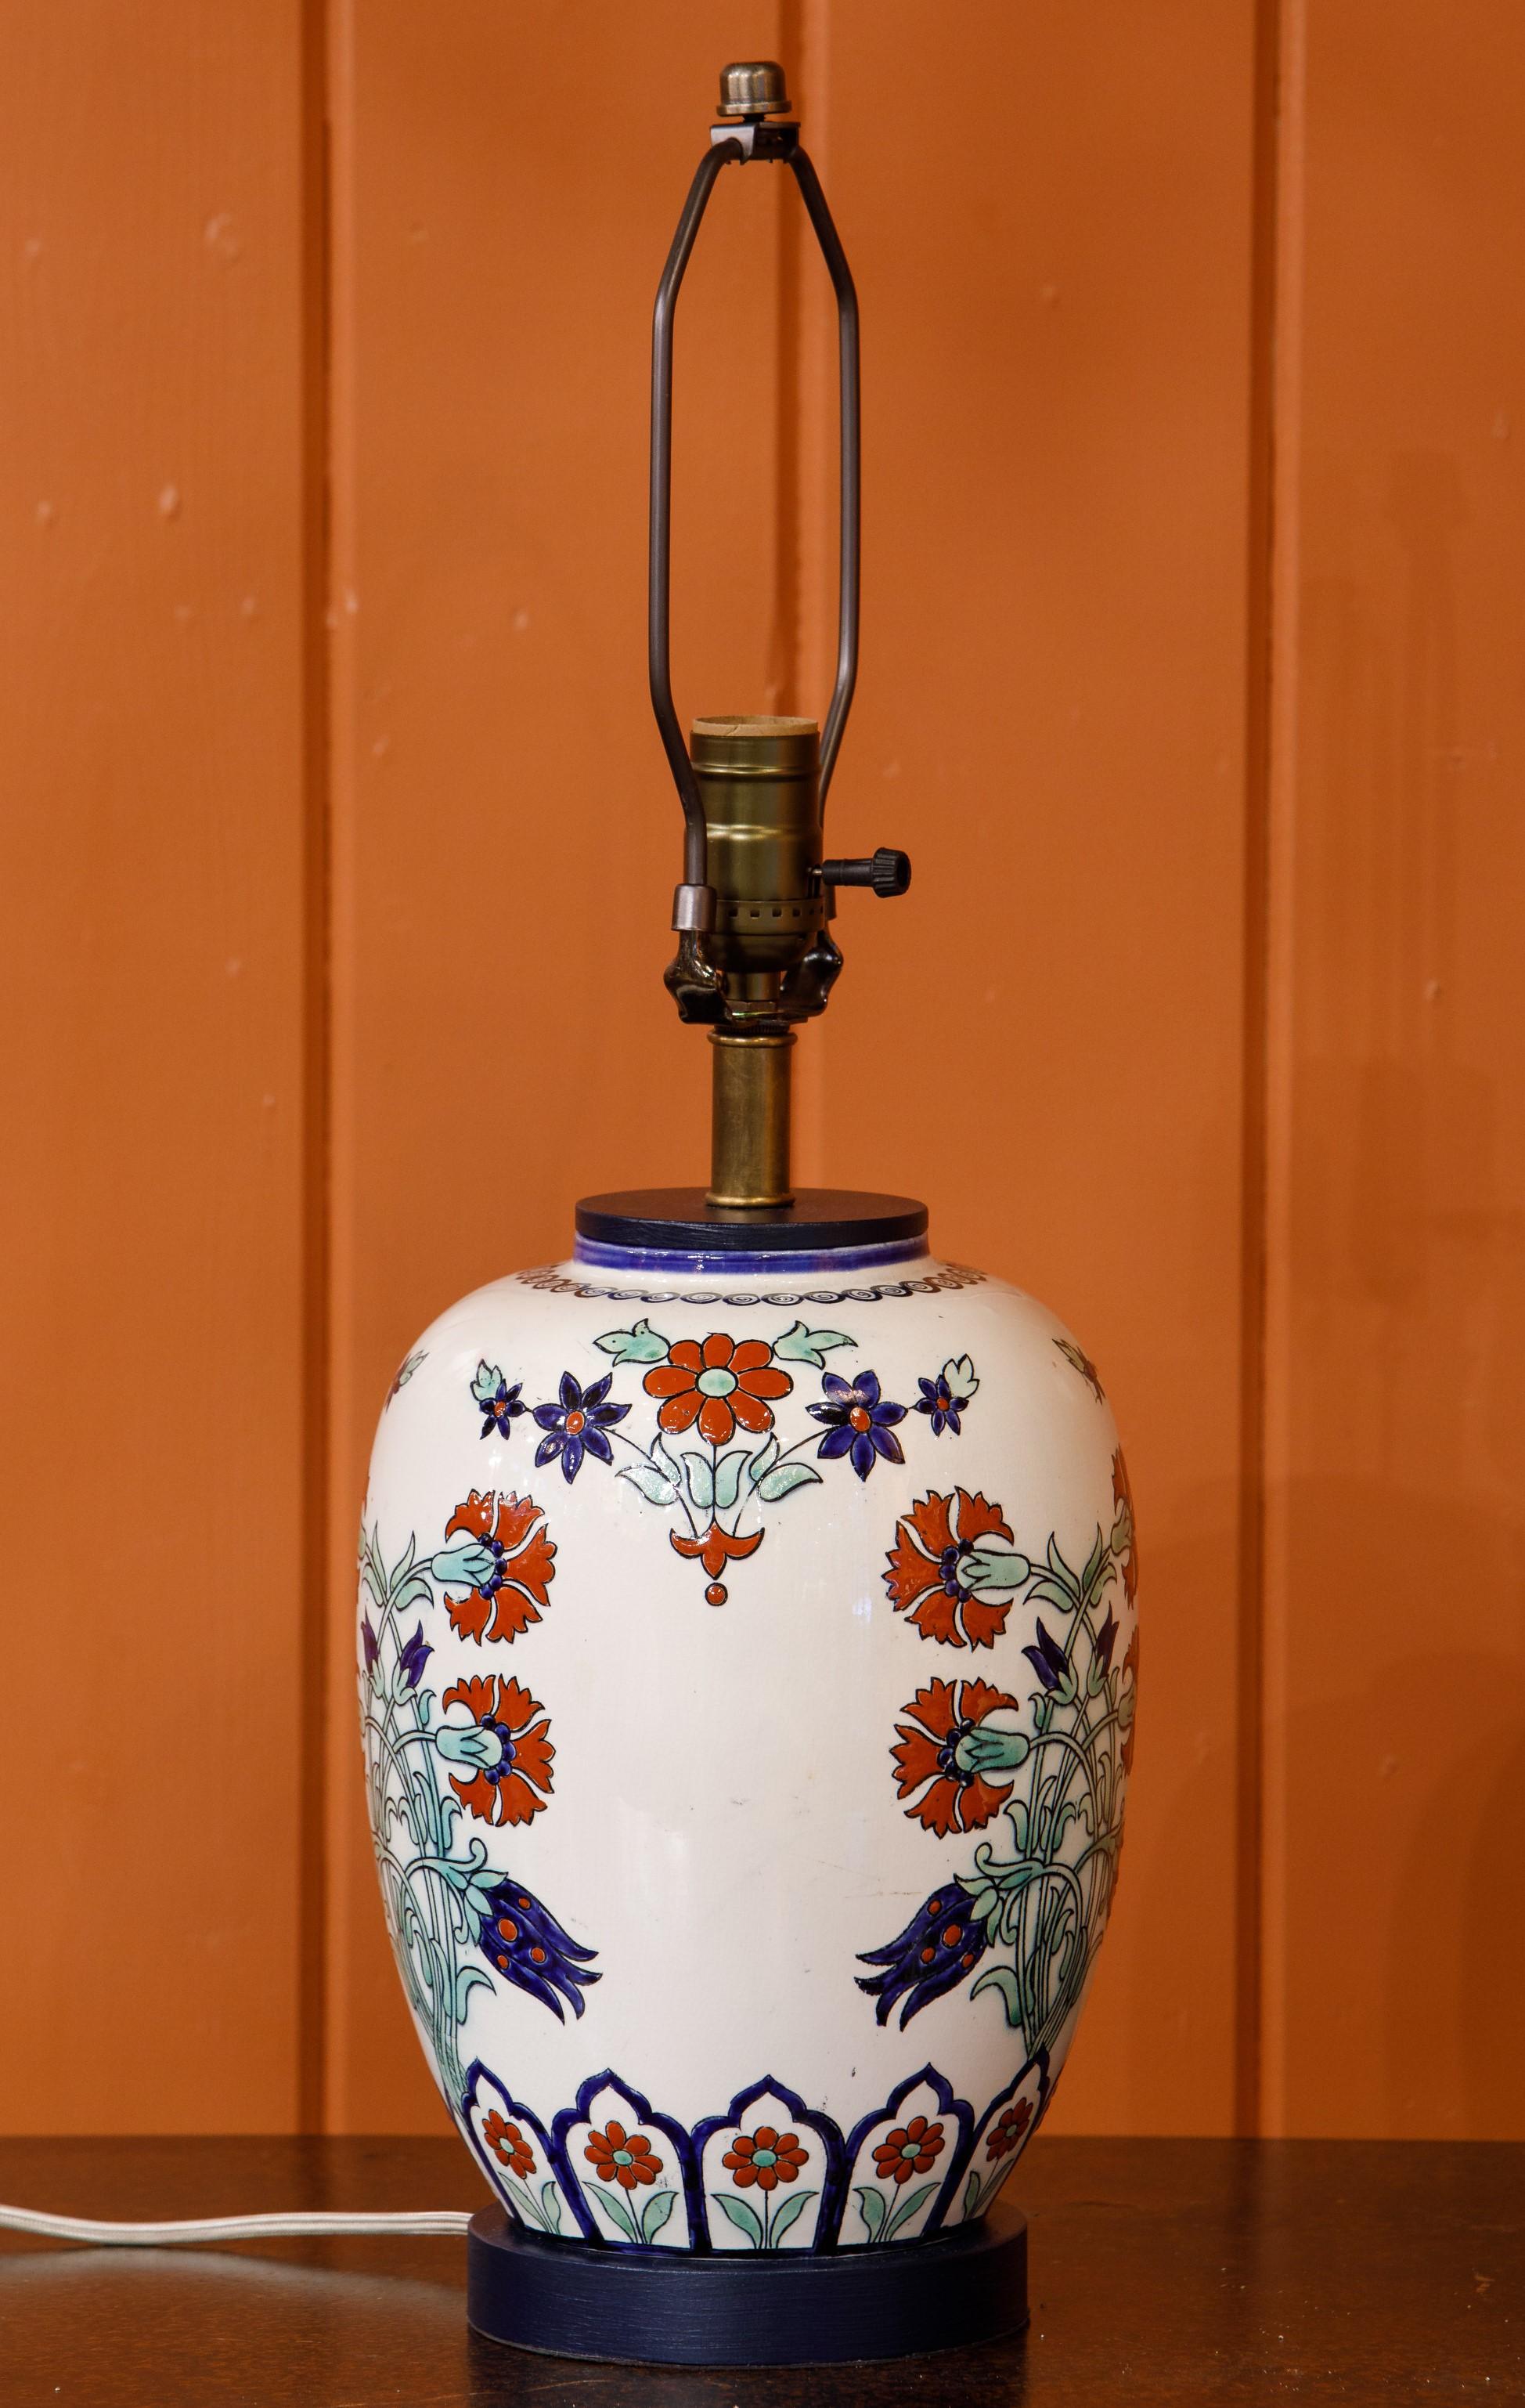 This is an interesting lamp with a colorful, and unusual motif. The unusual pattern of the lamp has an Anglo-Indian feel with bold colors in a folky flower motif. The lamp is hand-crafted and hand-painted ceramic. It has been re-wired for the US